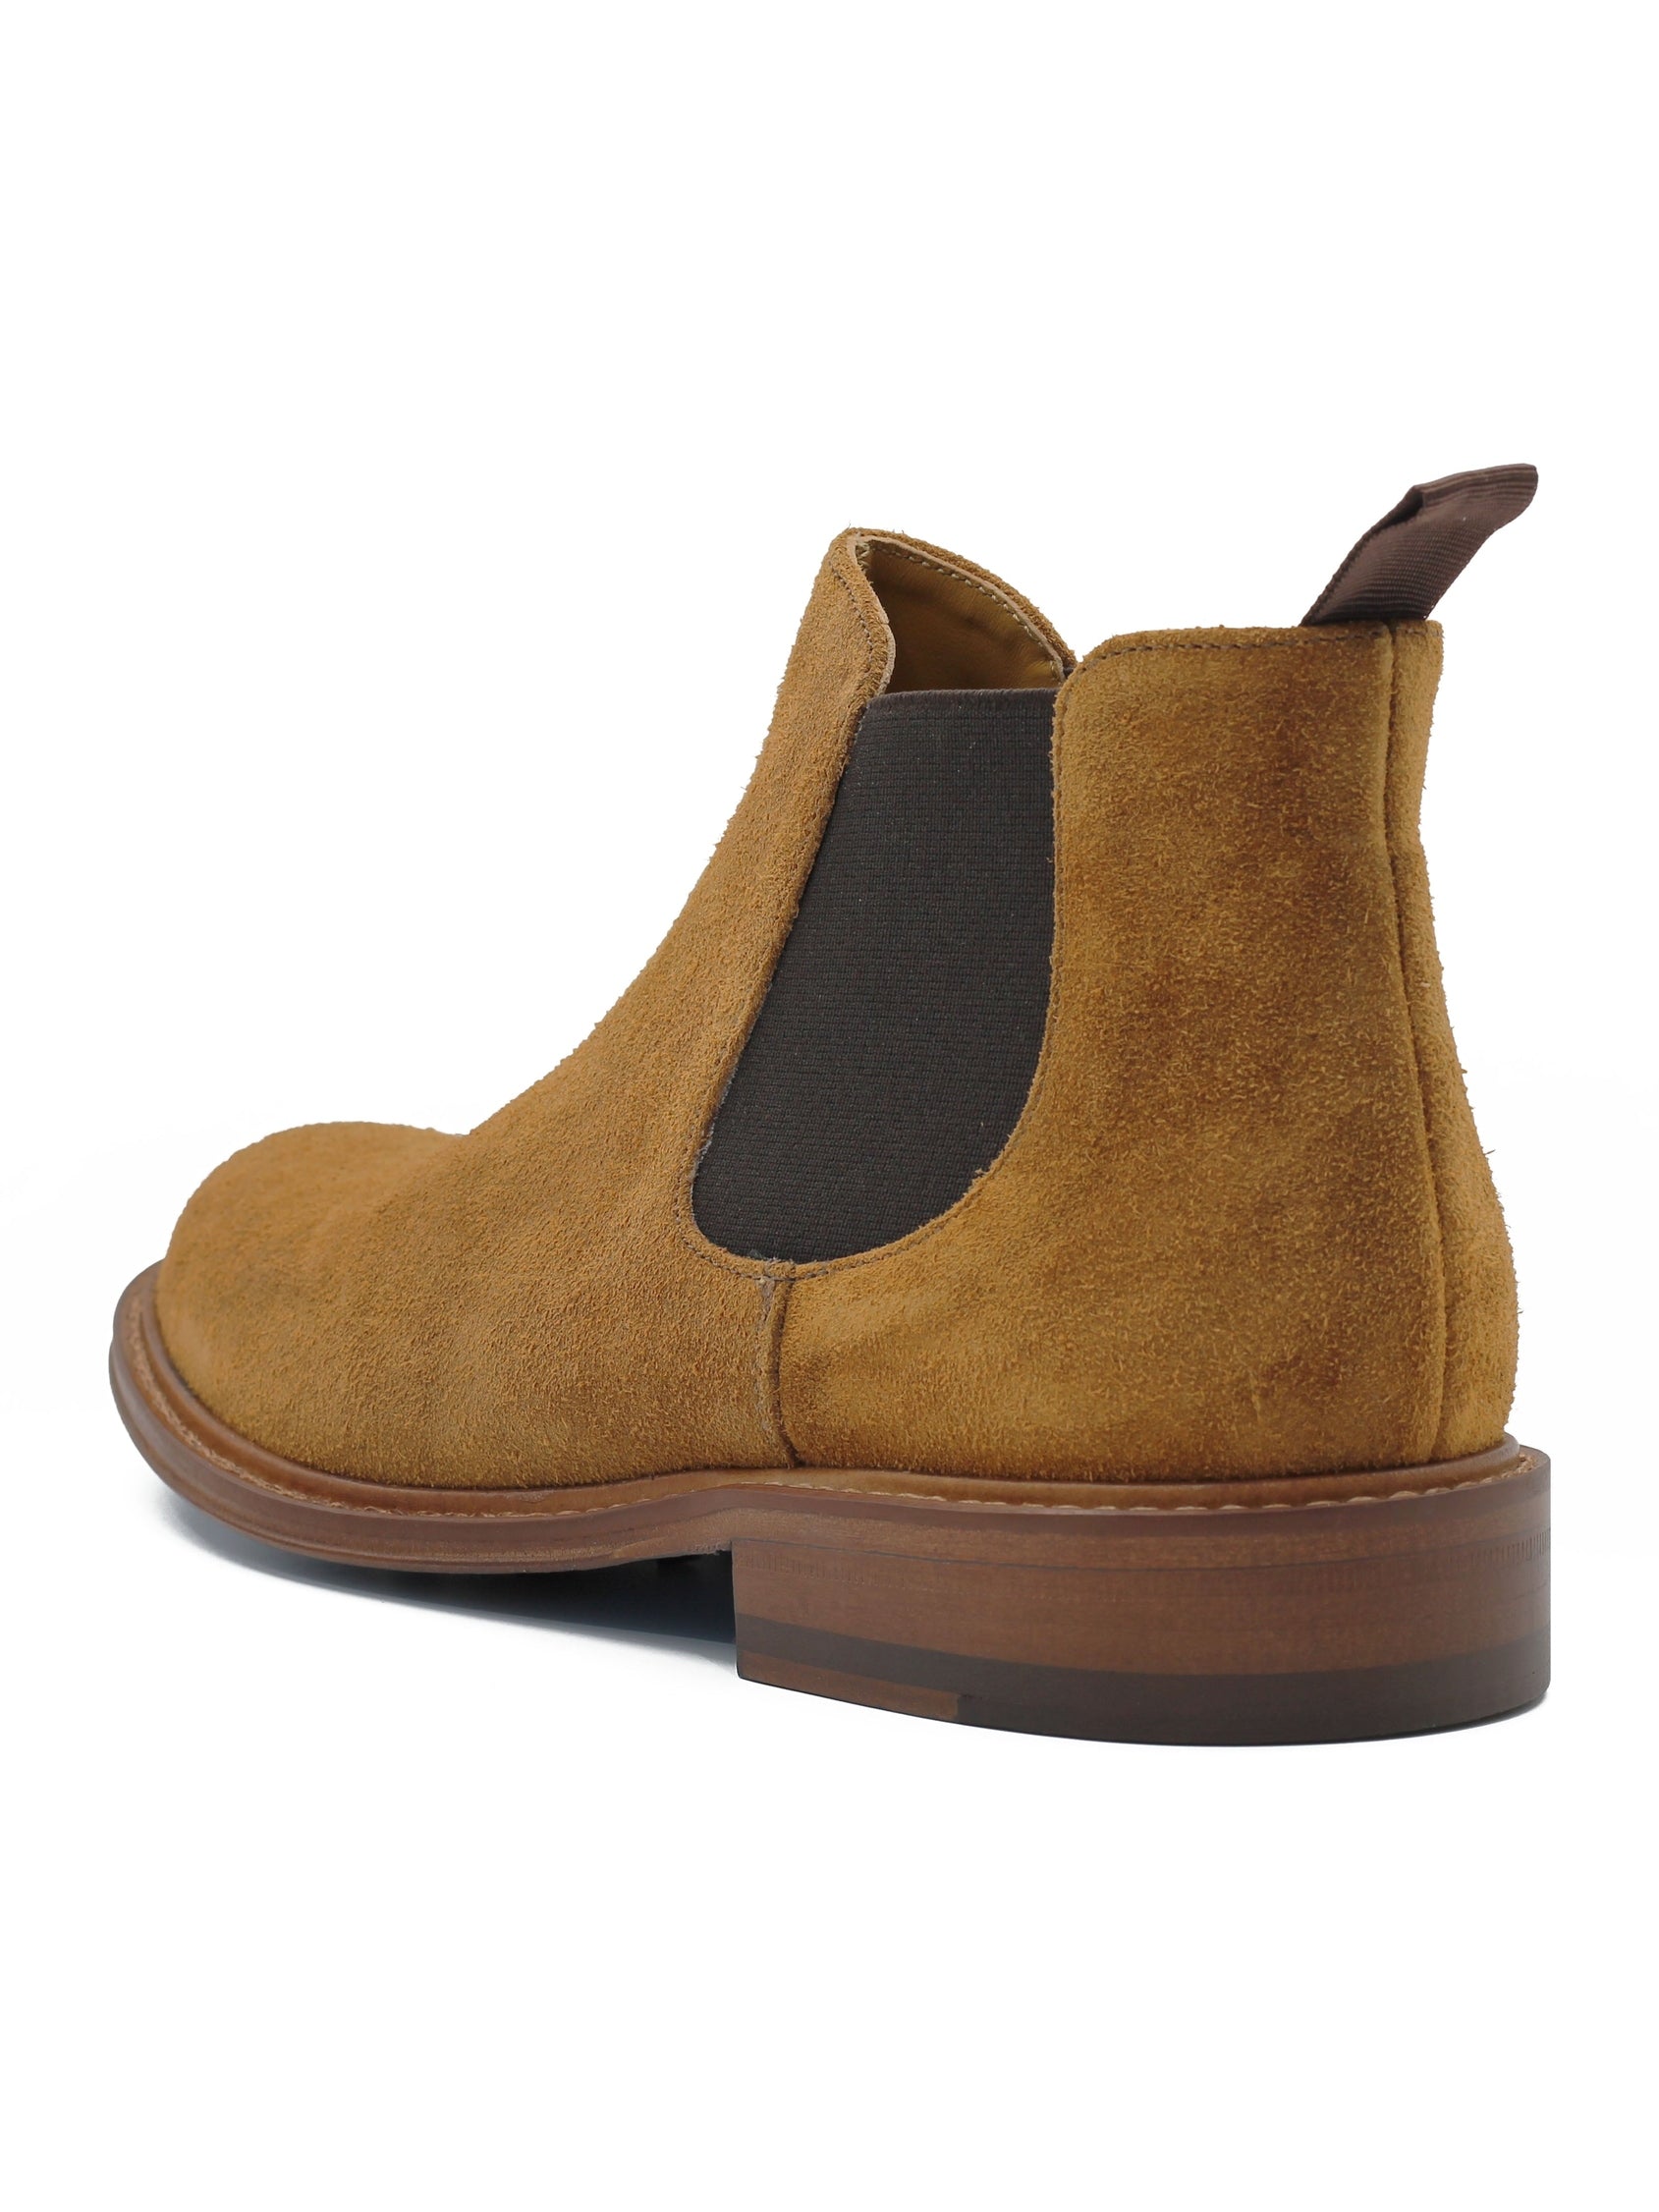 TAN ITALIAN SUEDE LEATHER CHELSEA BOOTS